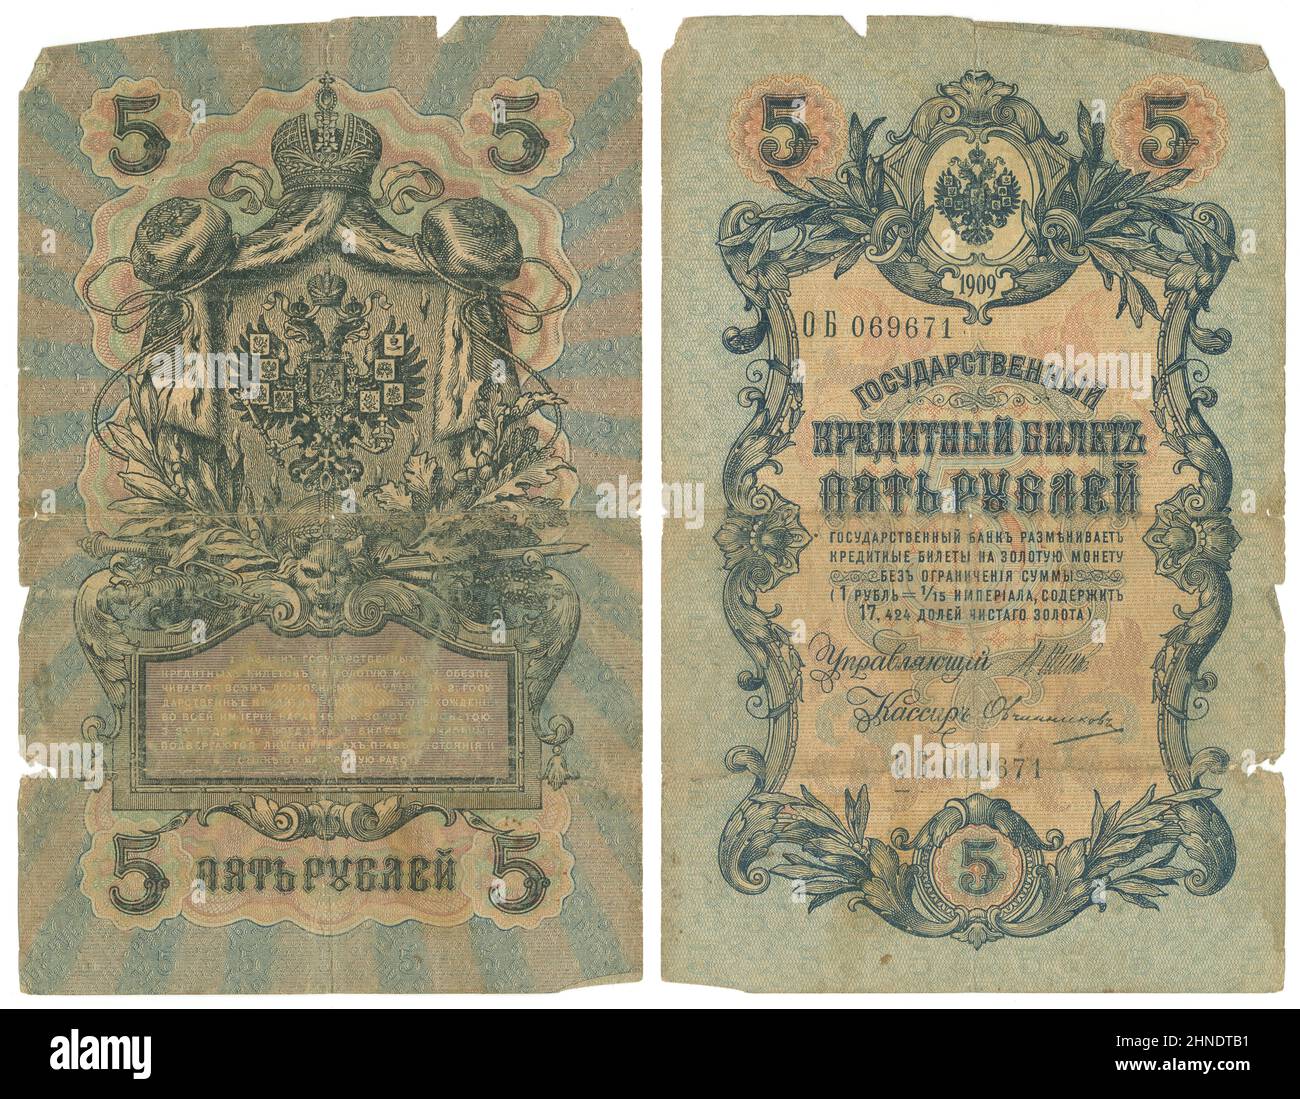 1909, Five Rubles note, Russia, obverse and reverse. Actual size: 156mm x 99mm. Stock Photo